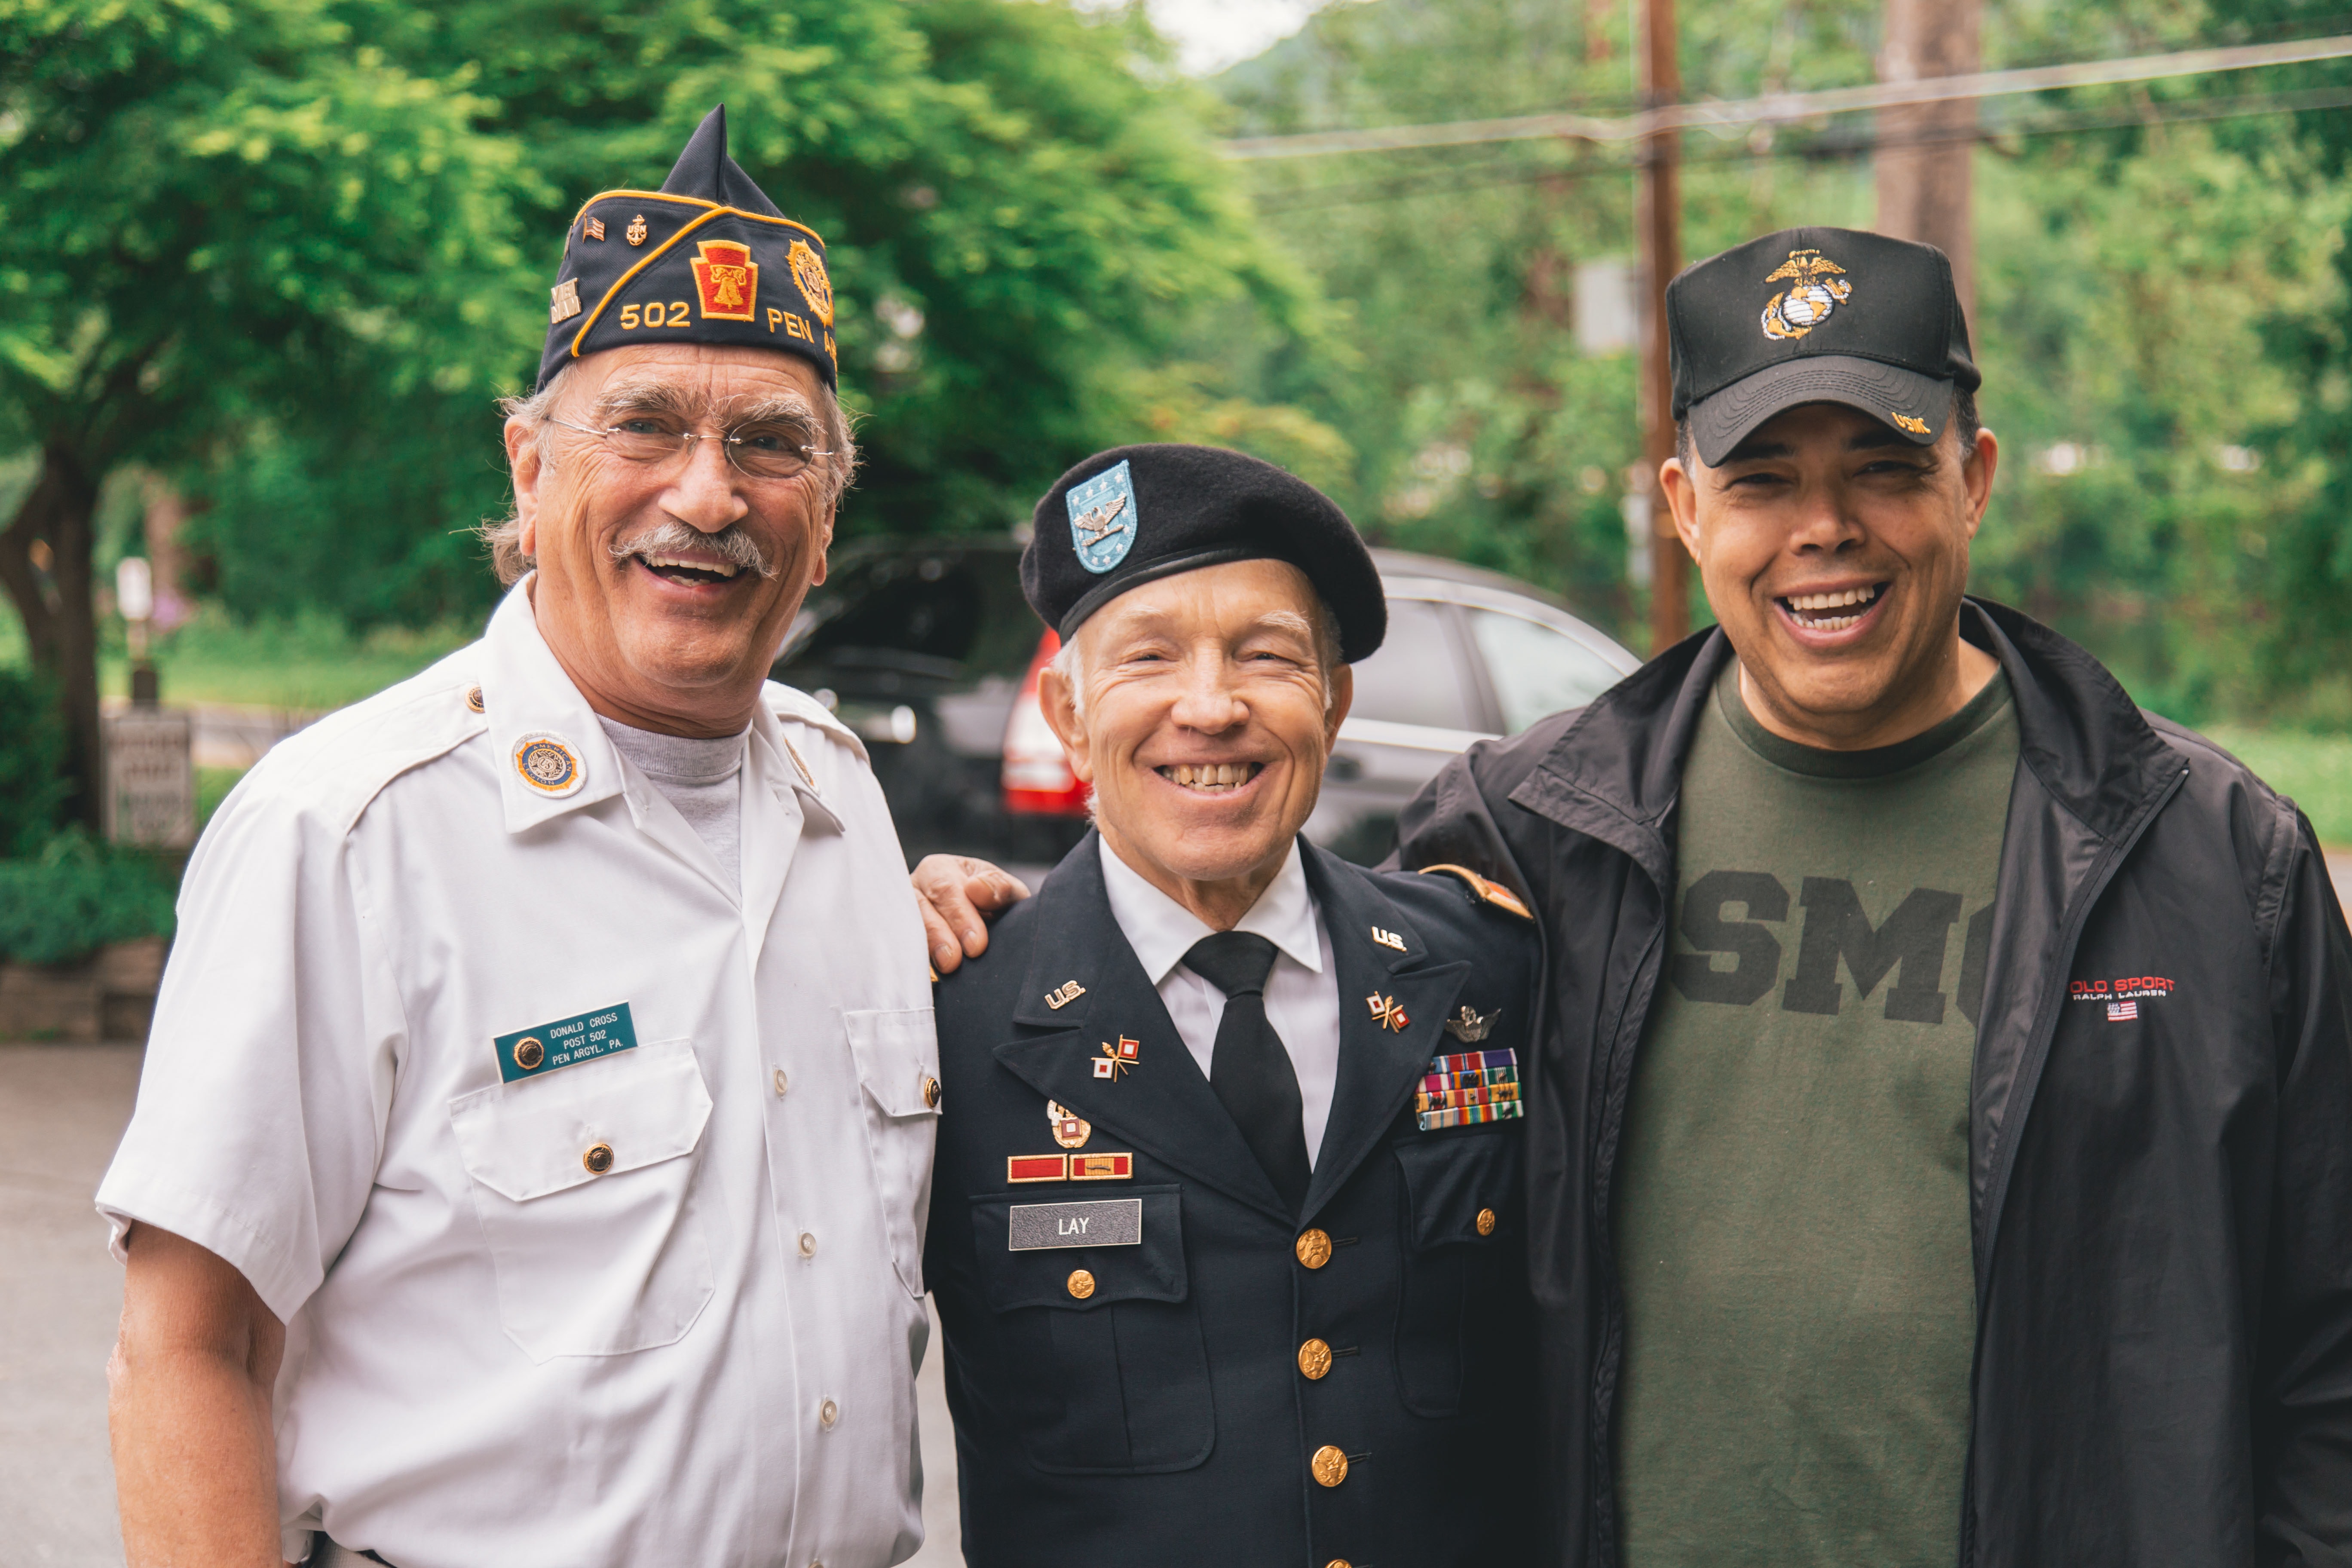 Dental Care for Veterans: Some Options and Steps to Take